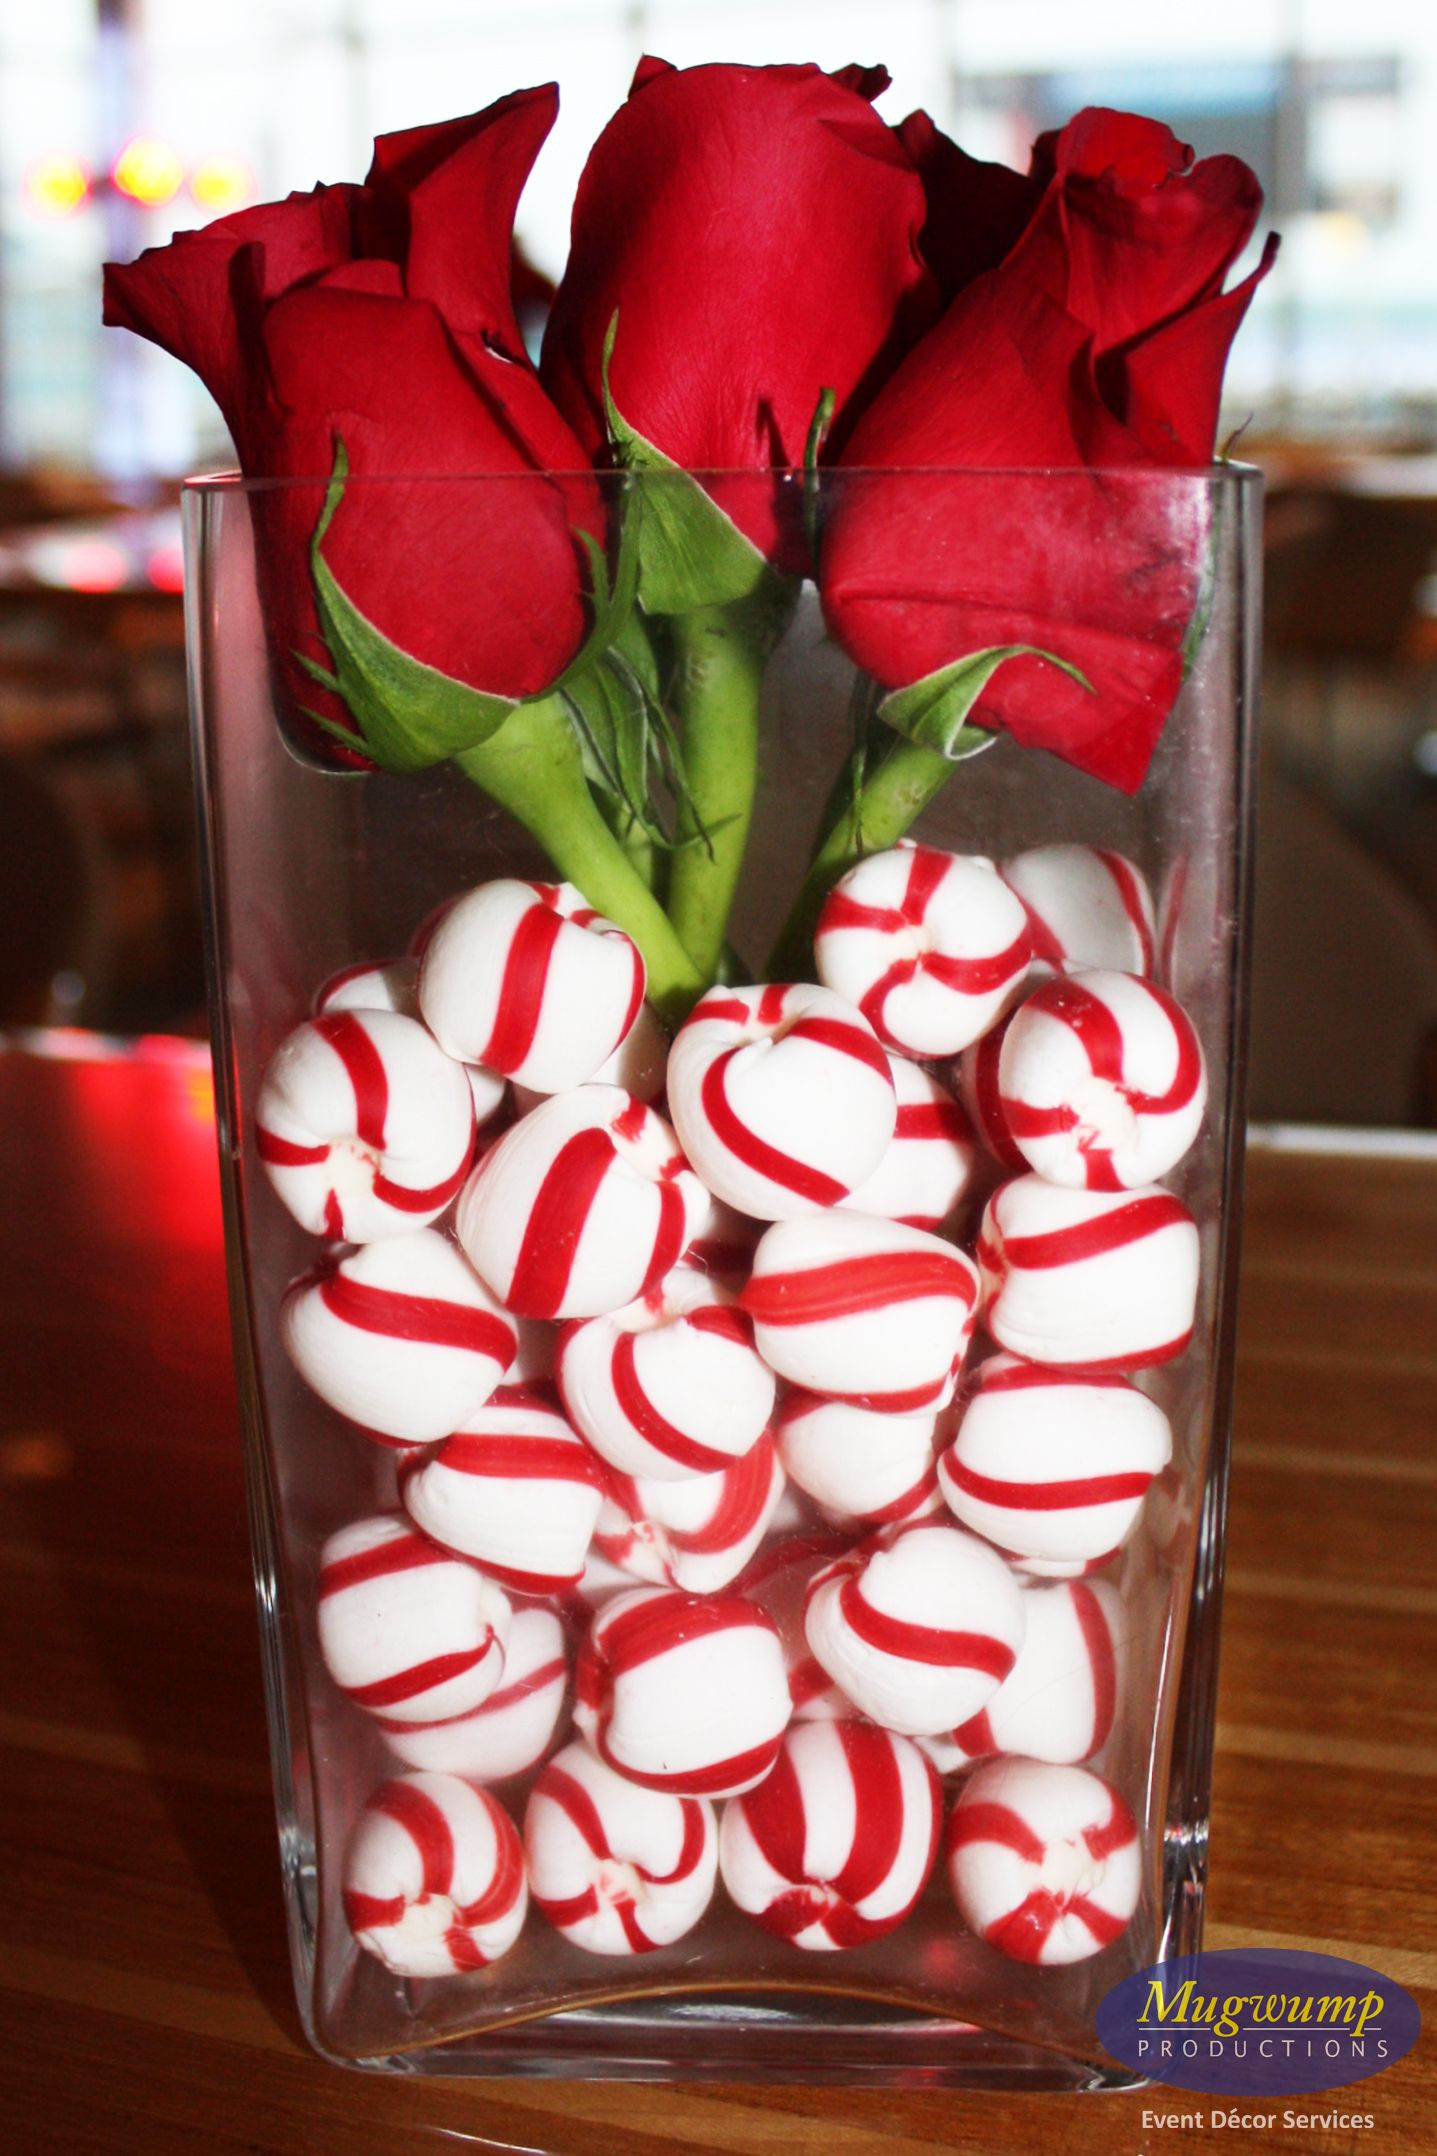 Candy Cane Centerpieces For Christmas
 Rose and Candy Cane Centerpiece perfect for Christmas